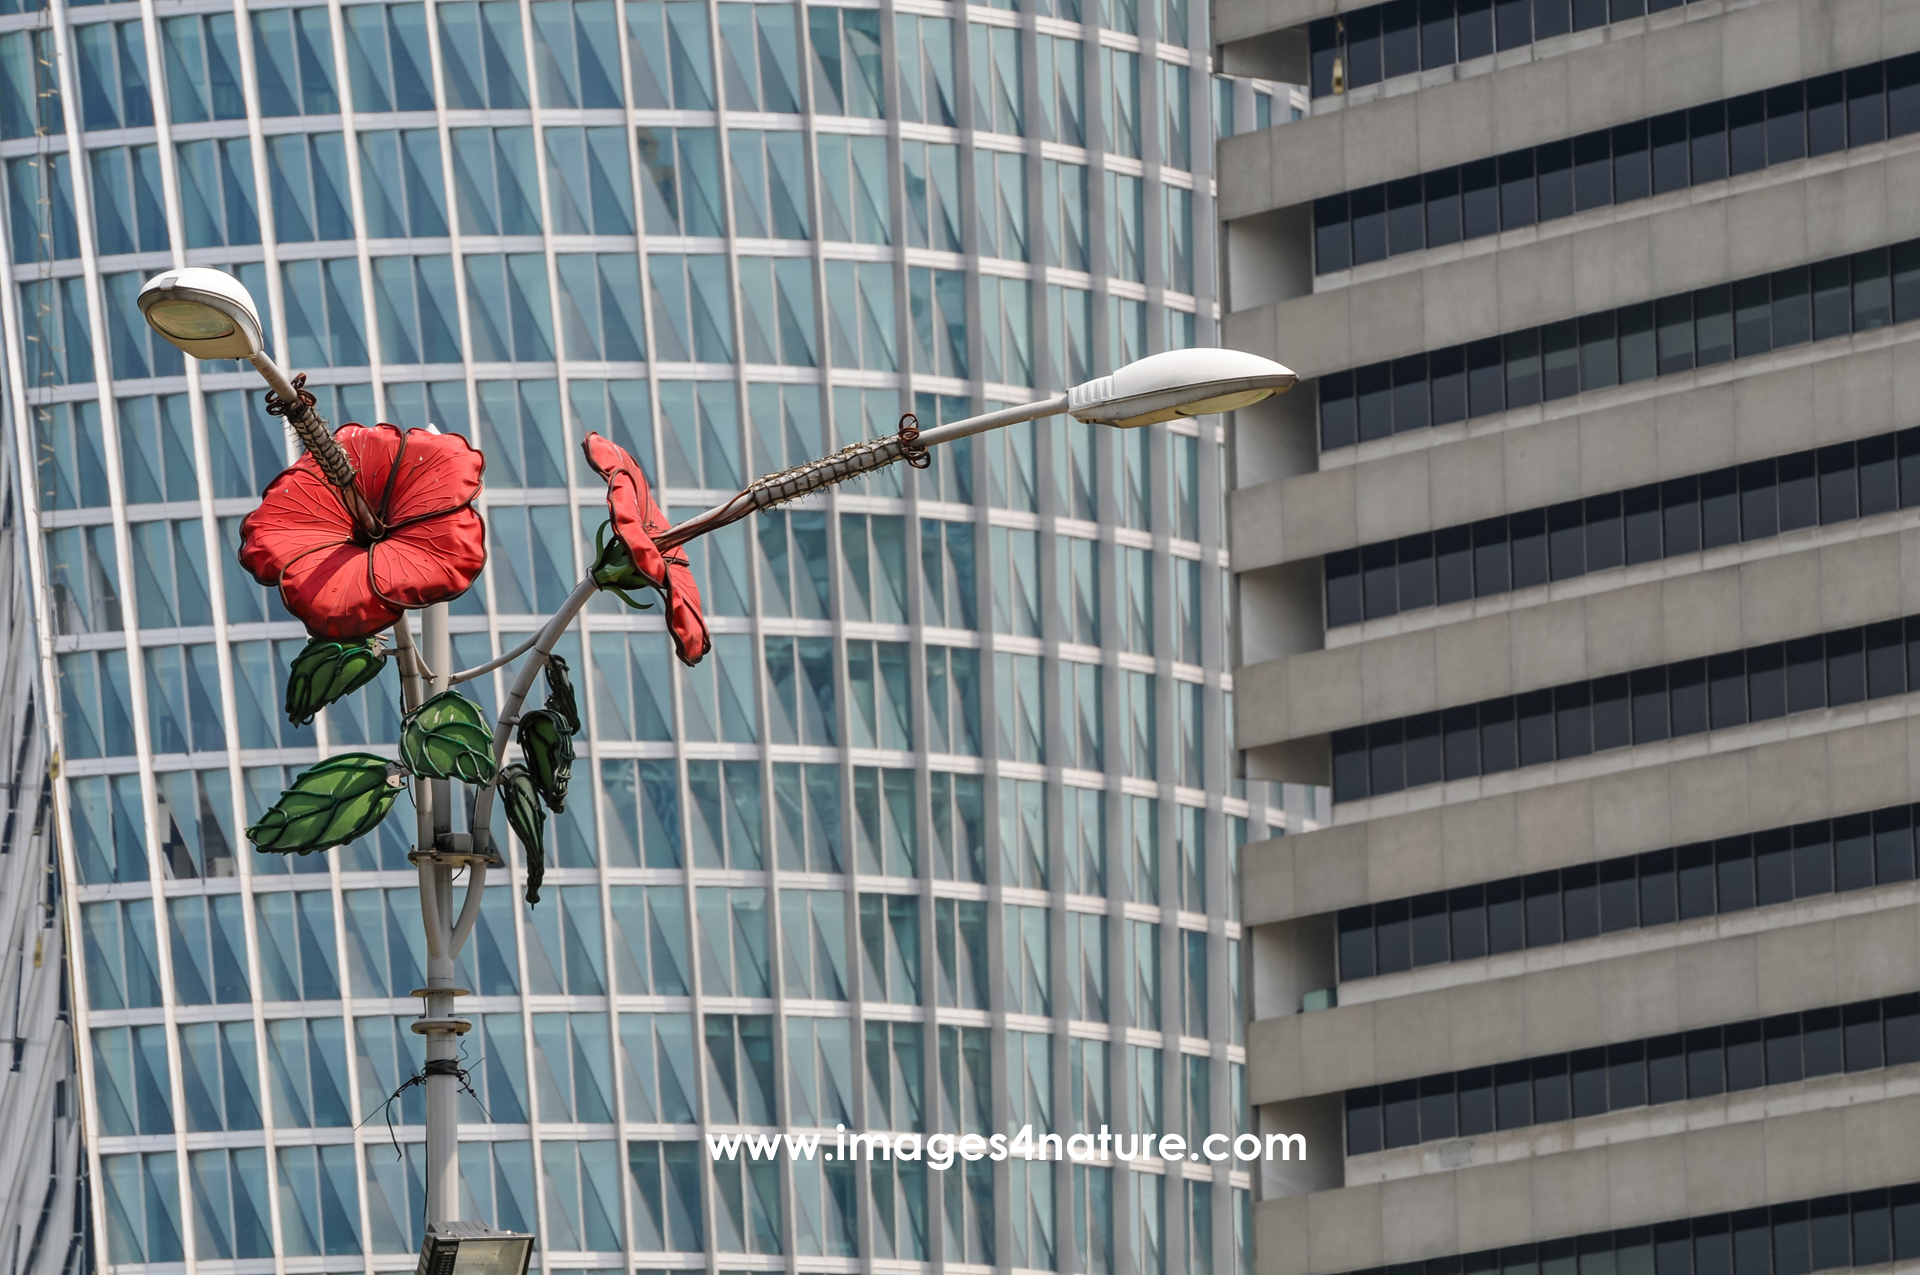 Red floral decoration on street lamp against modern buildings